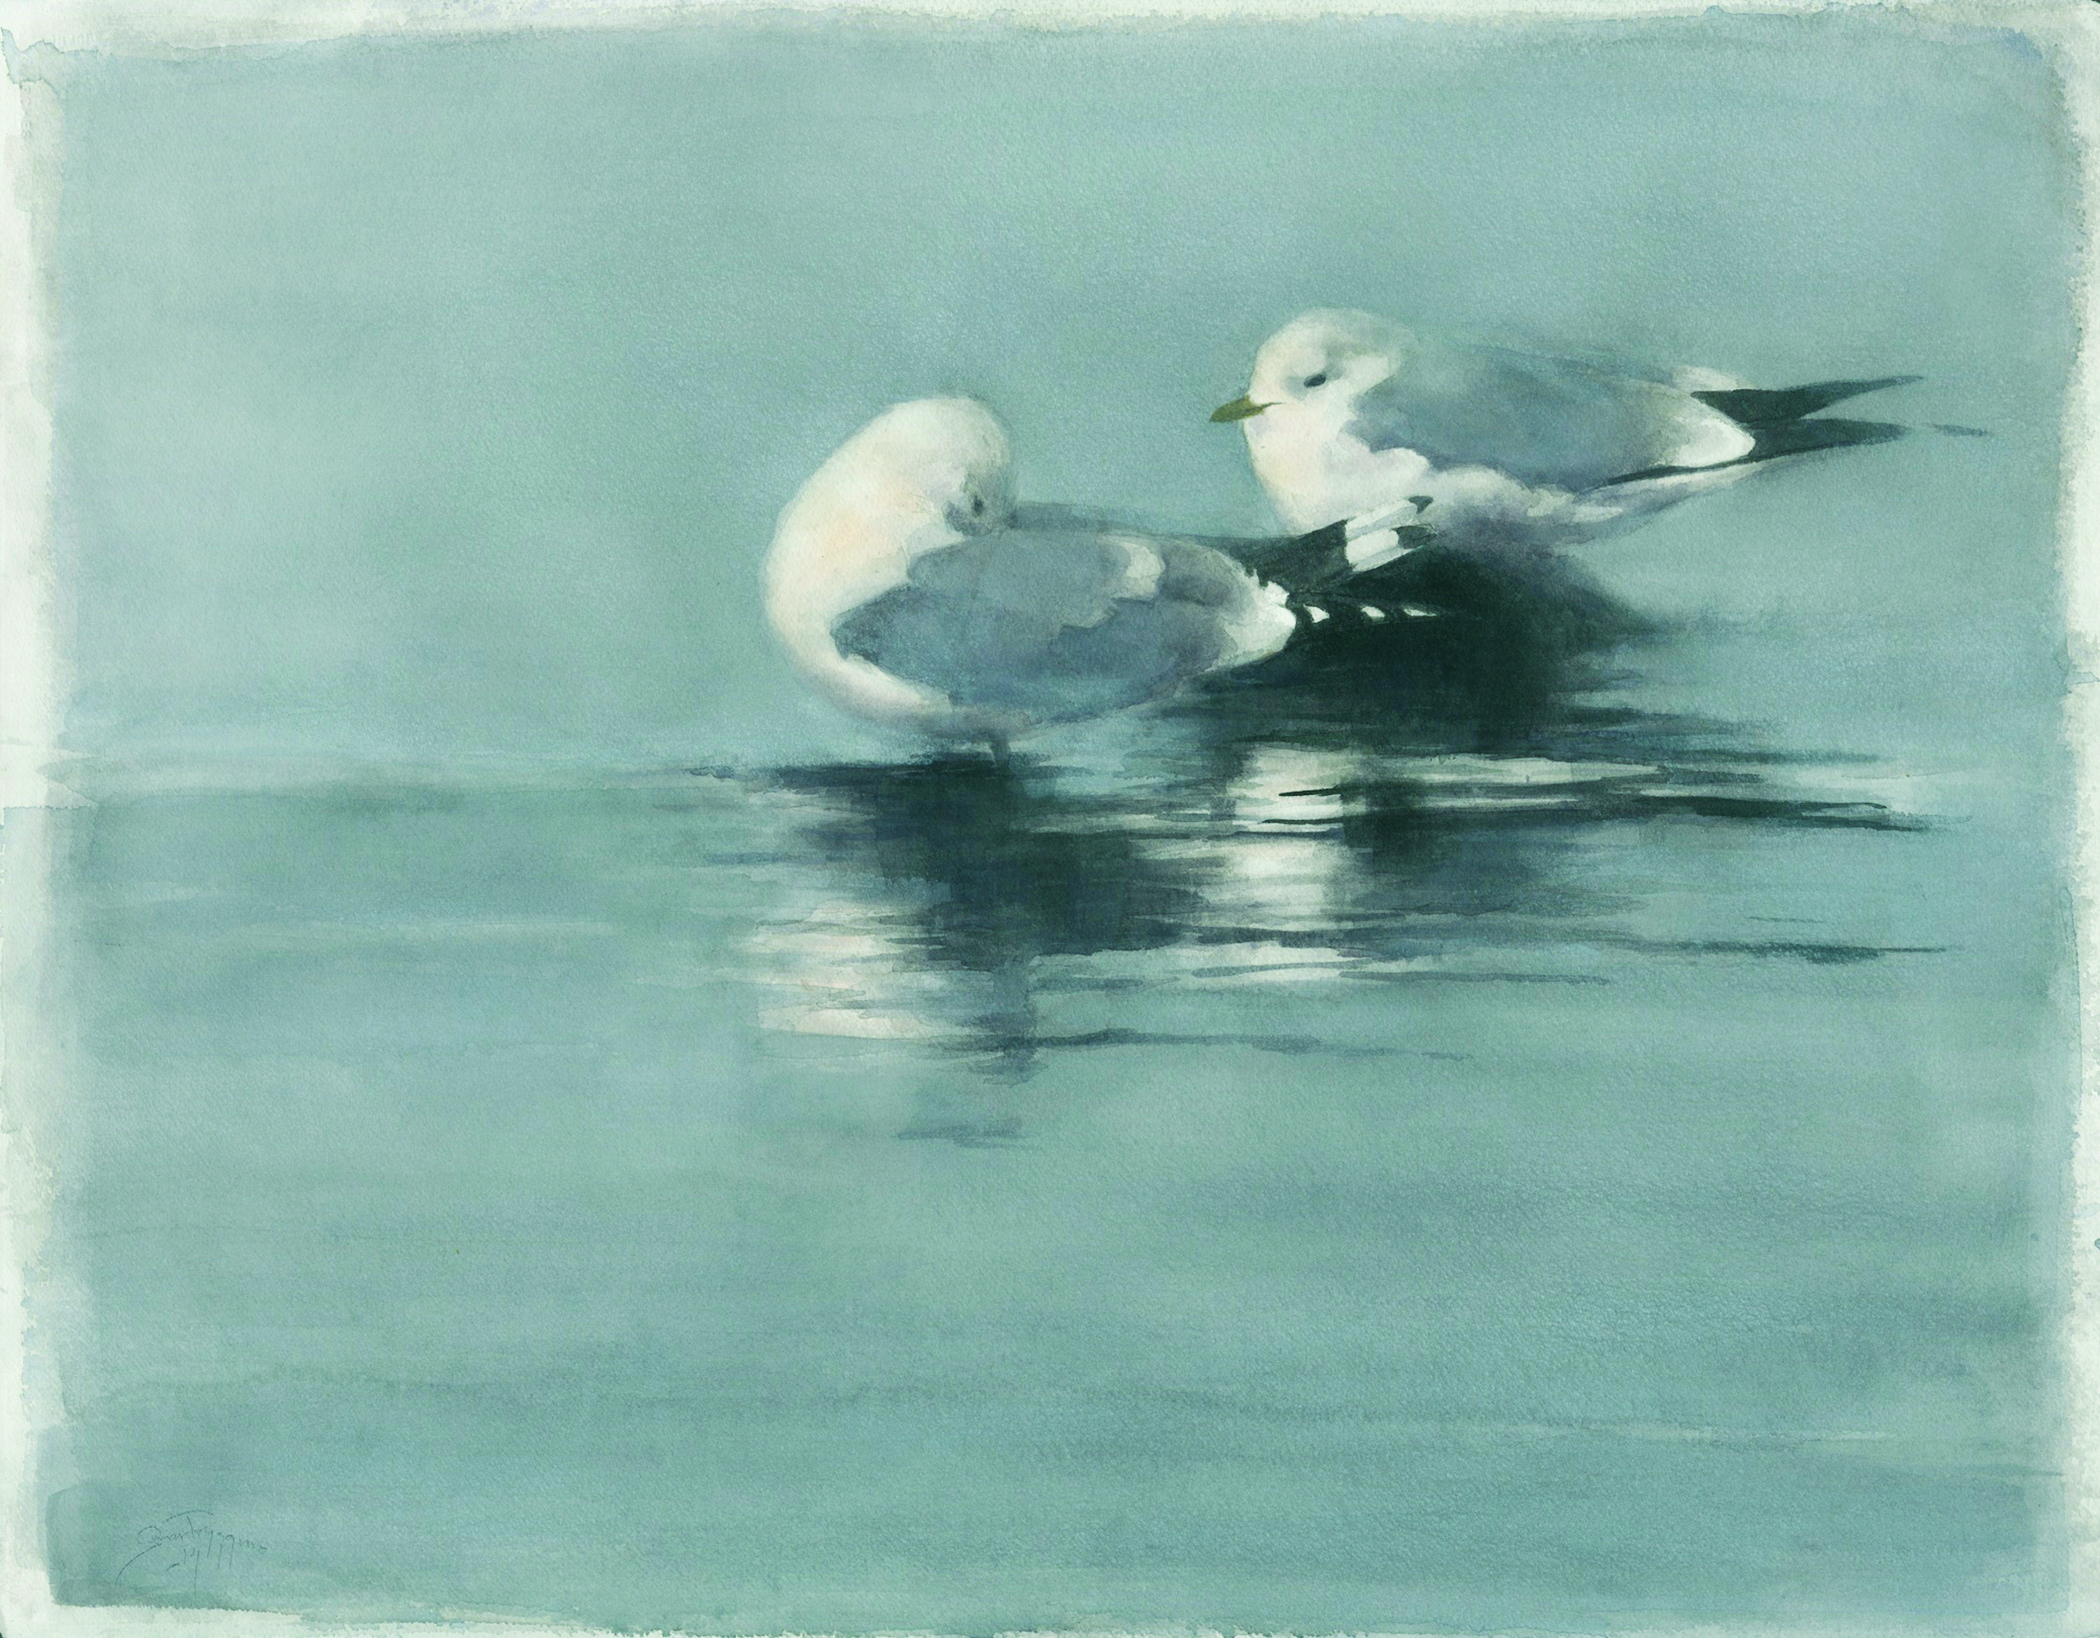 Watercolor painting of two seagulls on a grey day